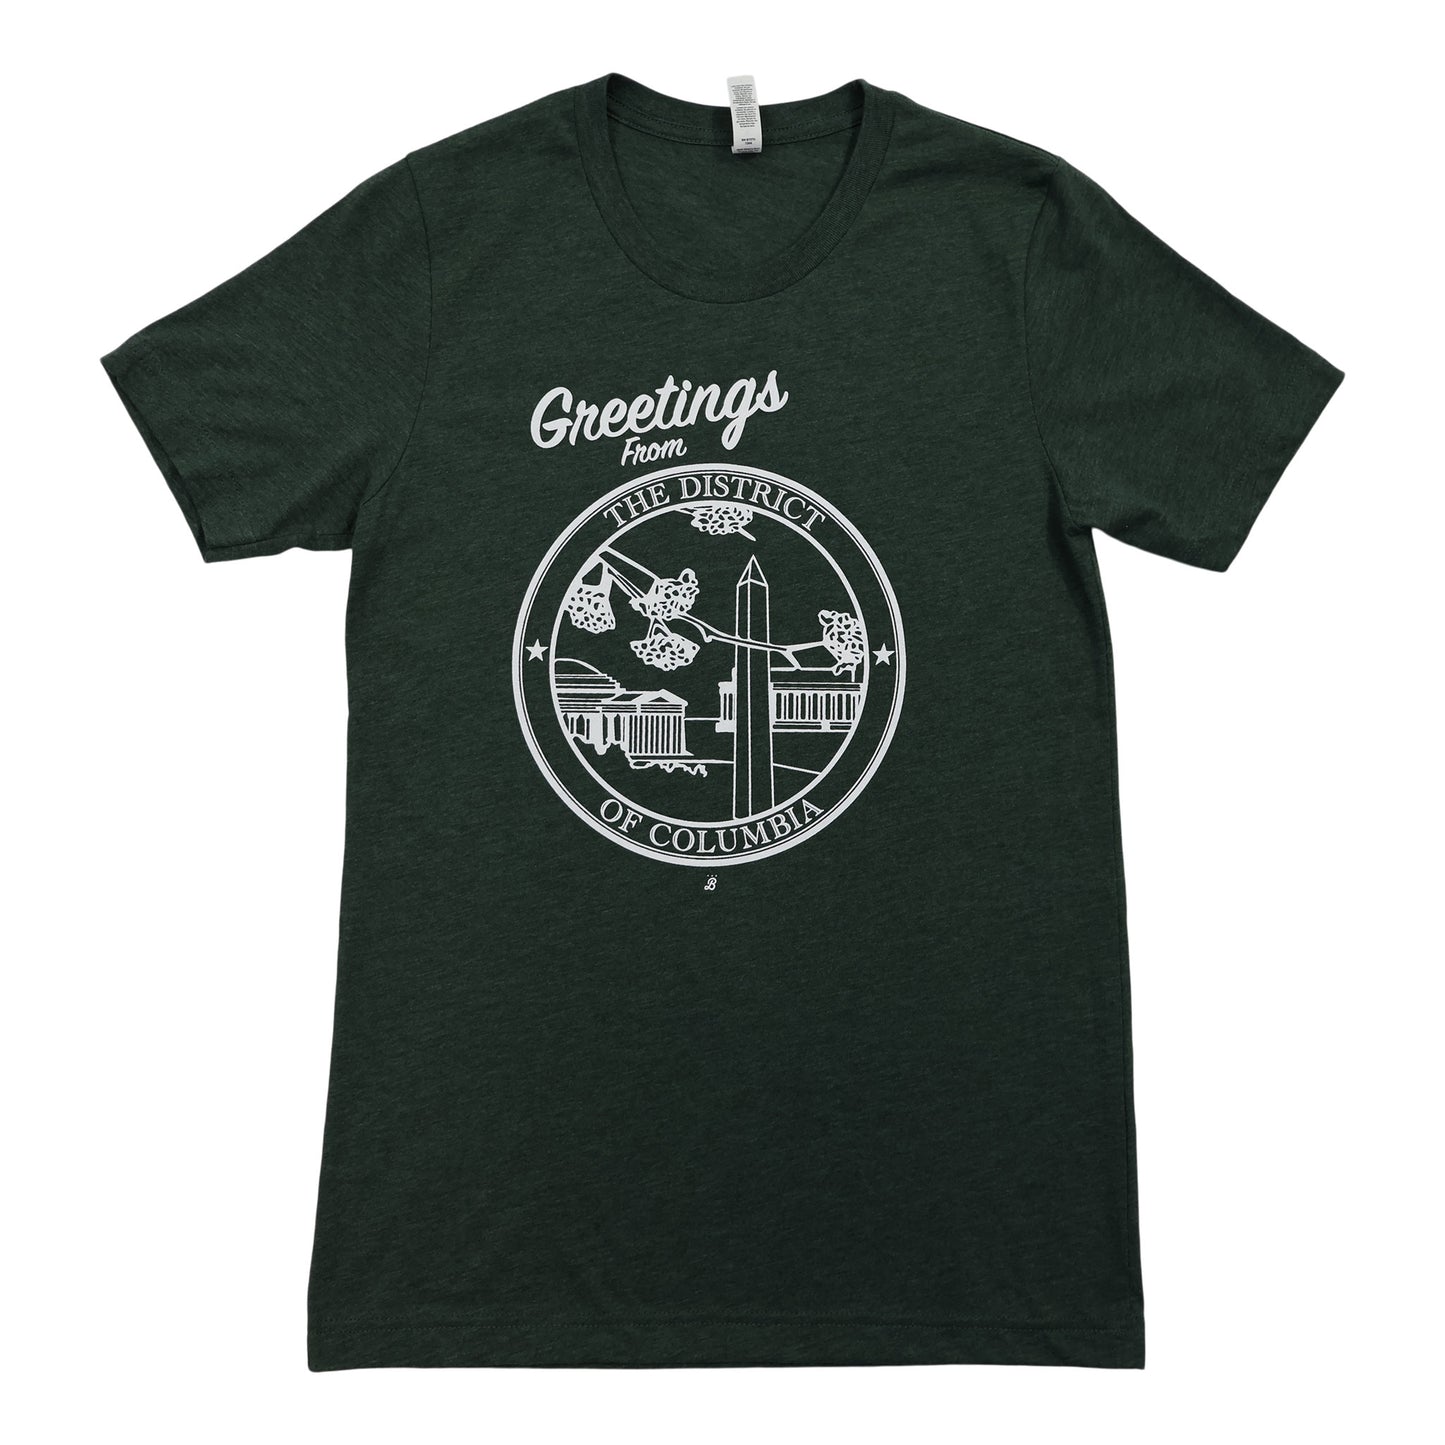 Unisex 'Greetings From The District' t-shirt